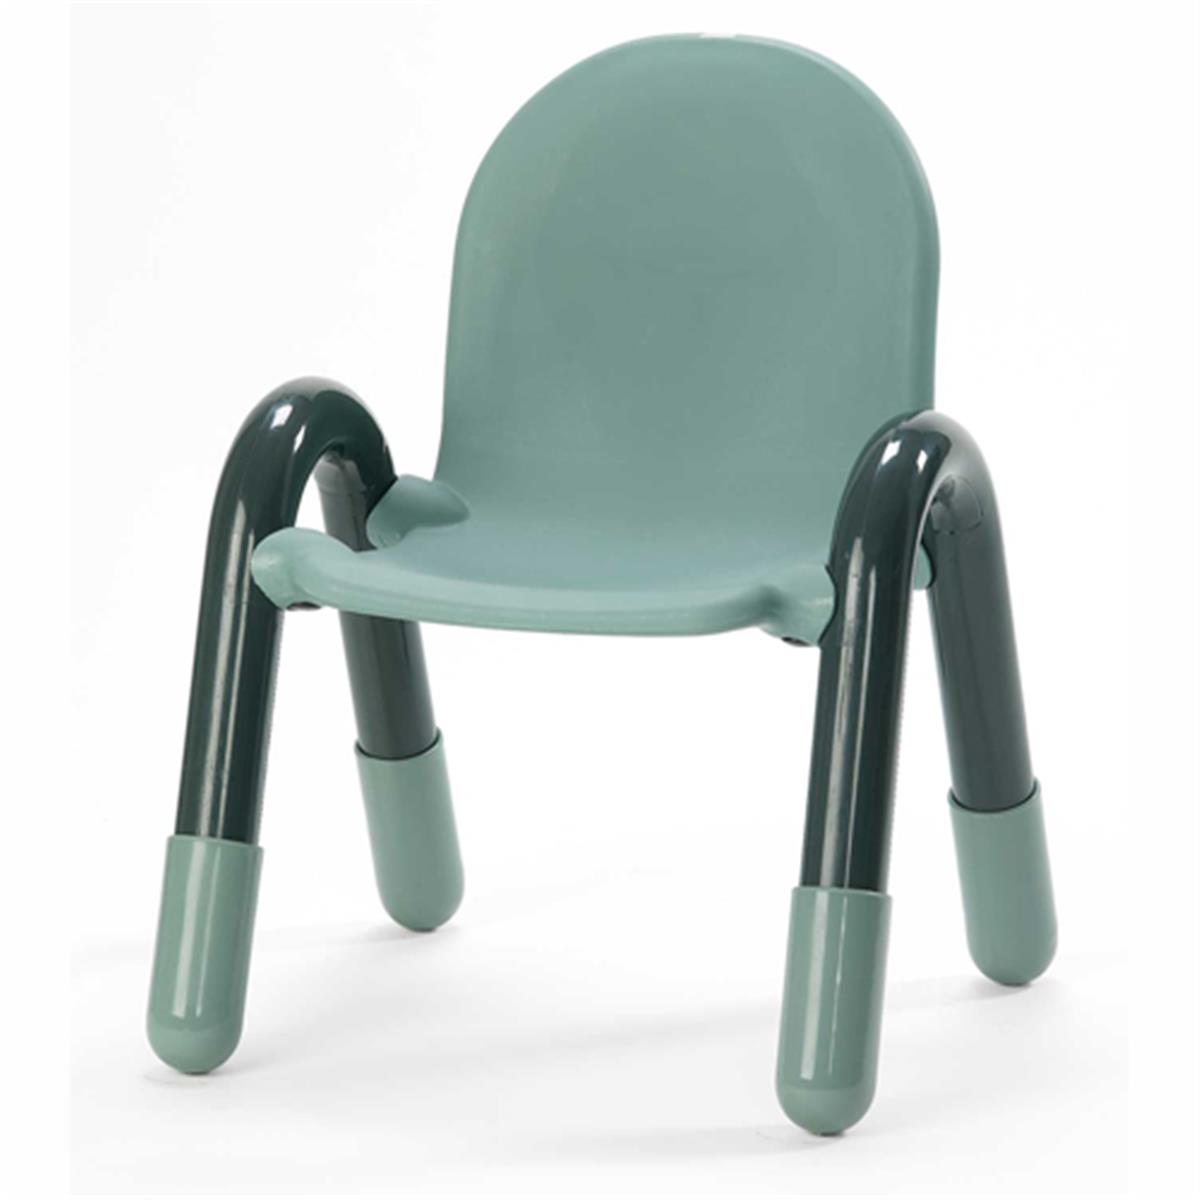 Angeles Ab7909gn 9 In. Baseline Plastic Classroom Chair, Teal Green